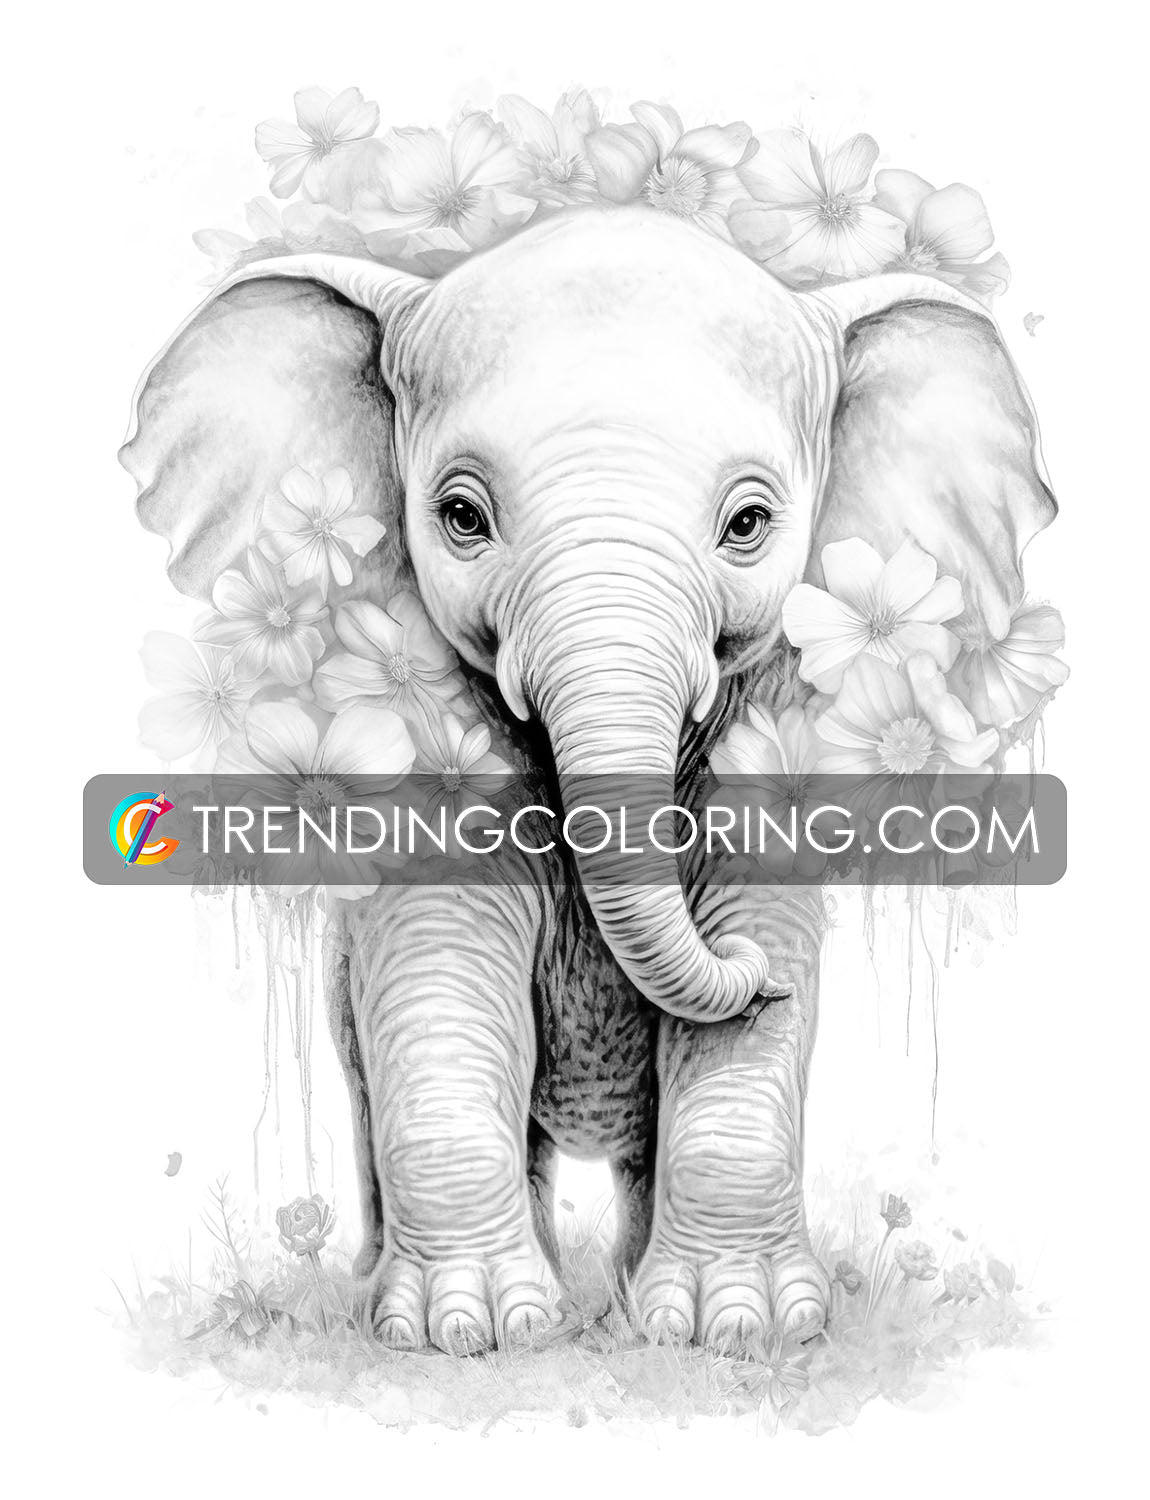 25 Baby Cute Animal Grayscale Coloring Pages - Instant Download - Printable PDF